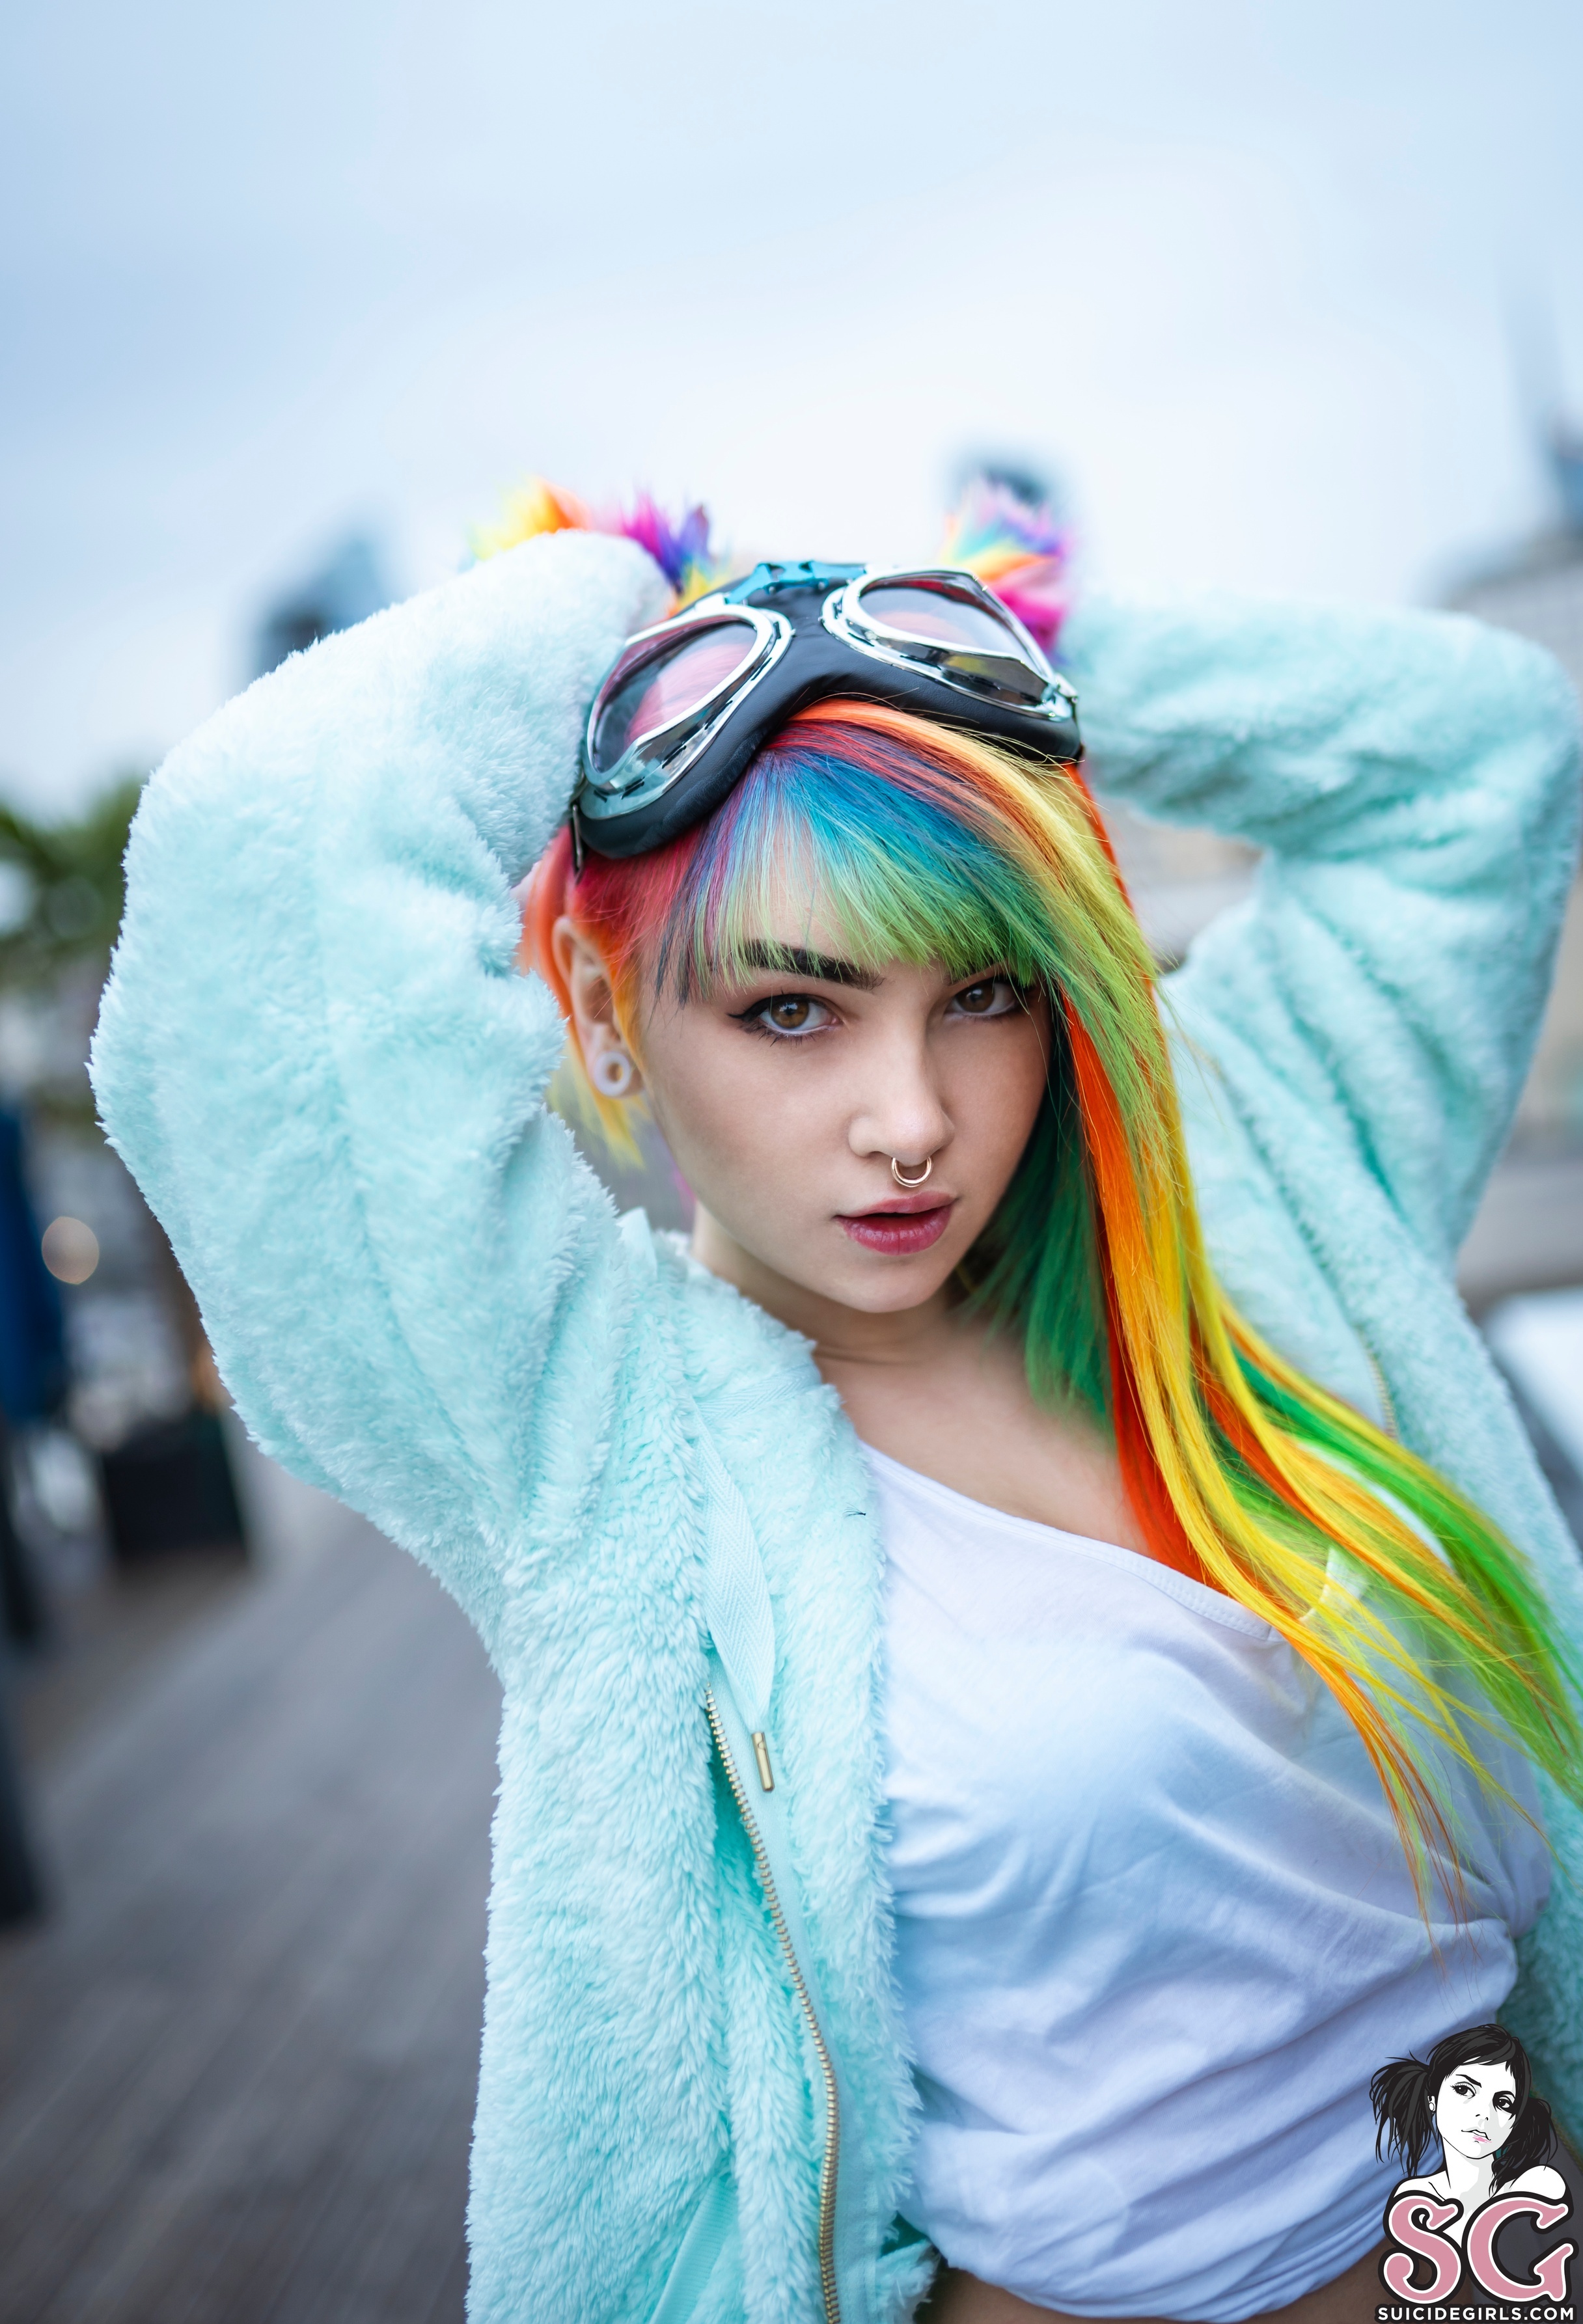 People 2432x3571 Mimo Suicide women Rainbow hair inked girls Suicide Girls brunette piercing white tops portrait display